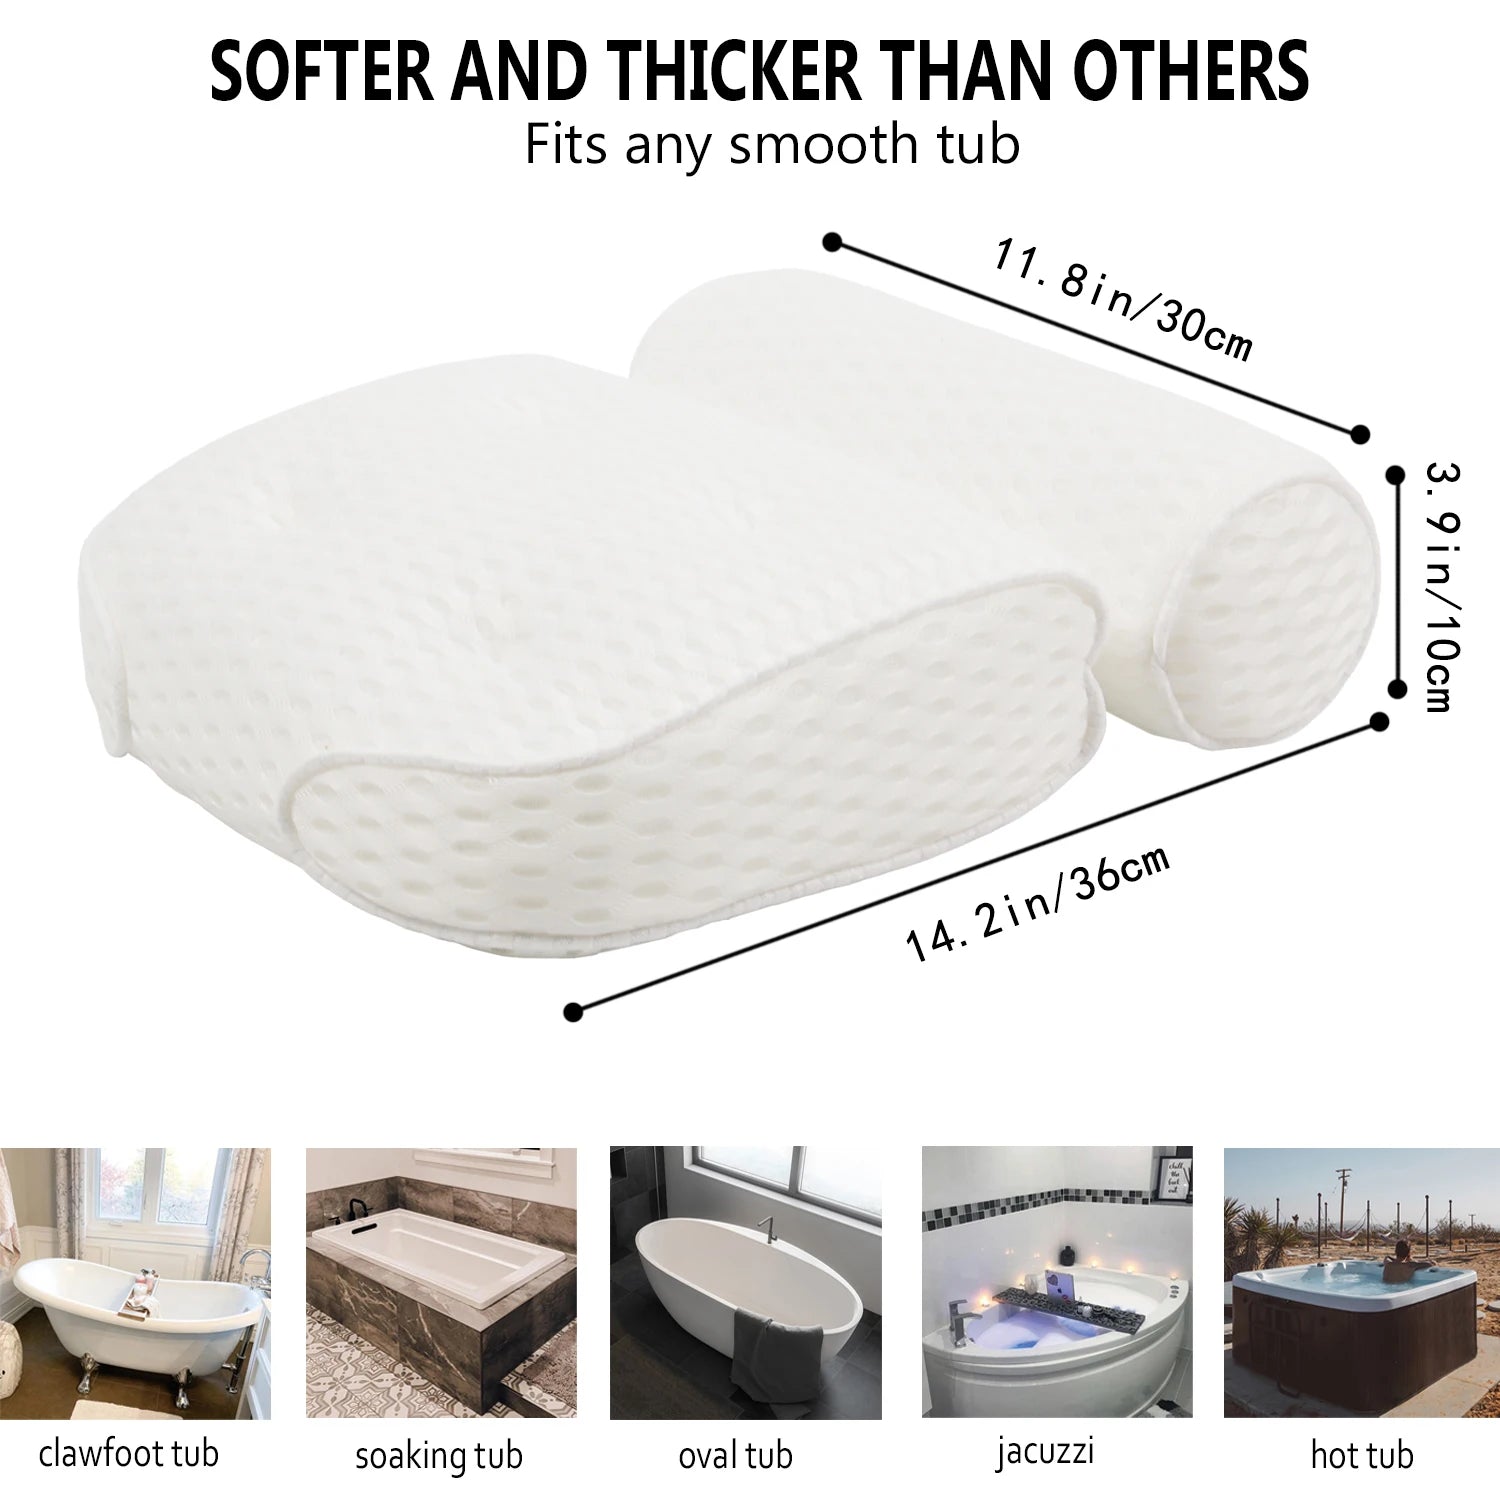 Bath Pillow for Bathtub Support Neck,Head and Back with Non-Slip Suction Cups air mesh Bathtub Pillow